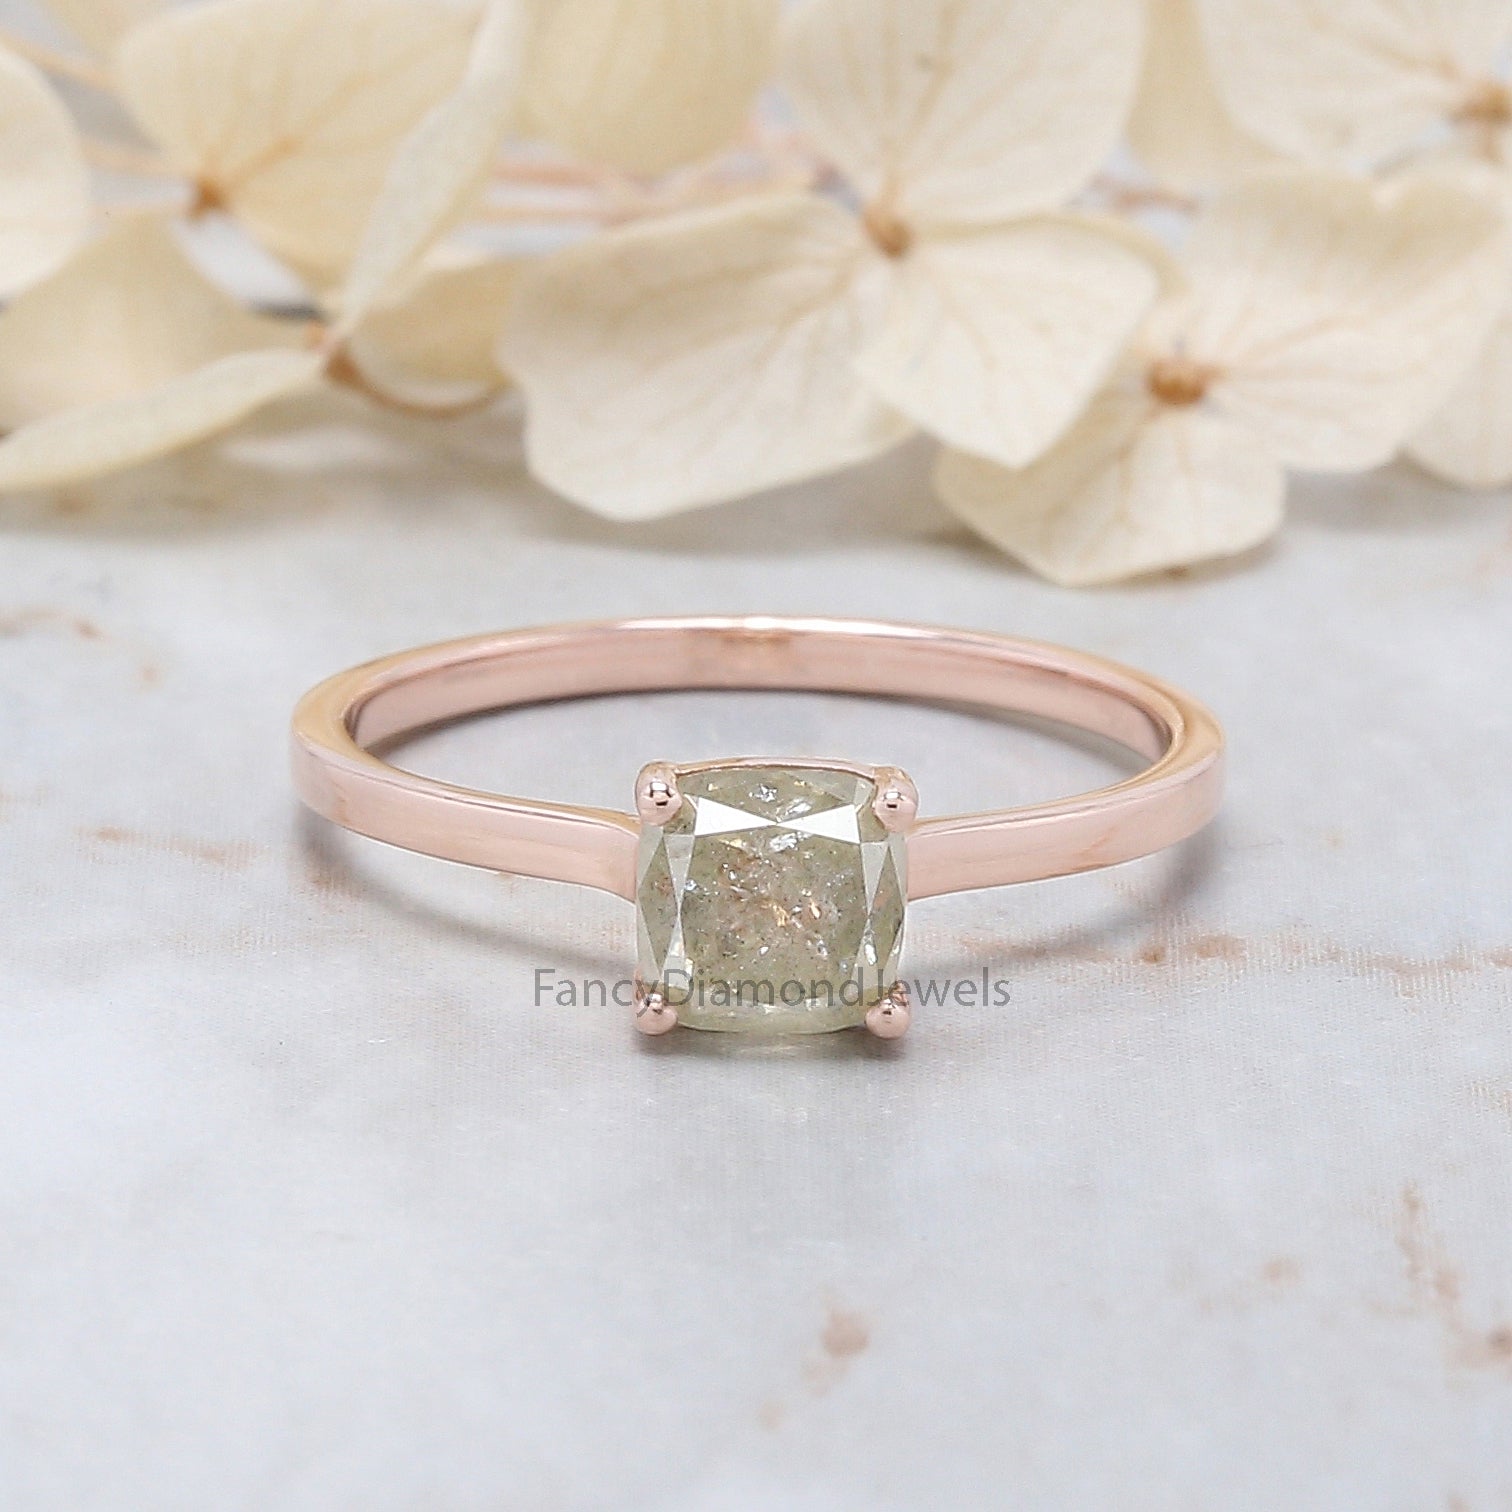 Cushion Cut Grey Color Diamond Ring 1.06 Ct 5.20 MM Cushion Diamond Ring 14K Solid Rose Gold Silver Engagement Ring Gift For Her QL5910